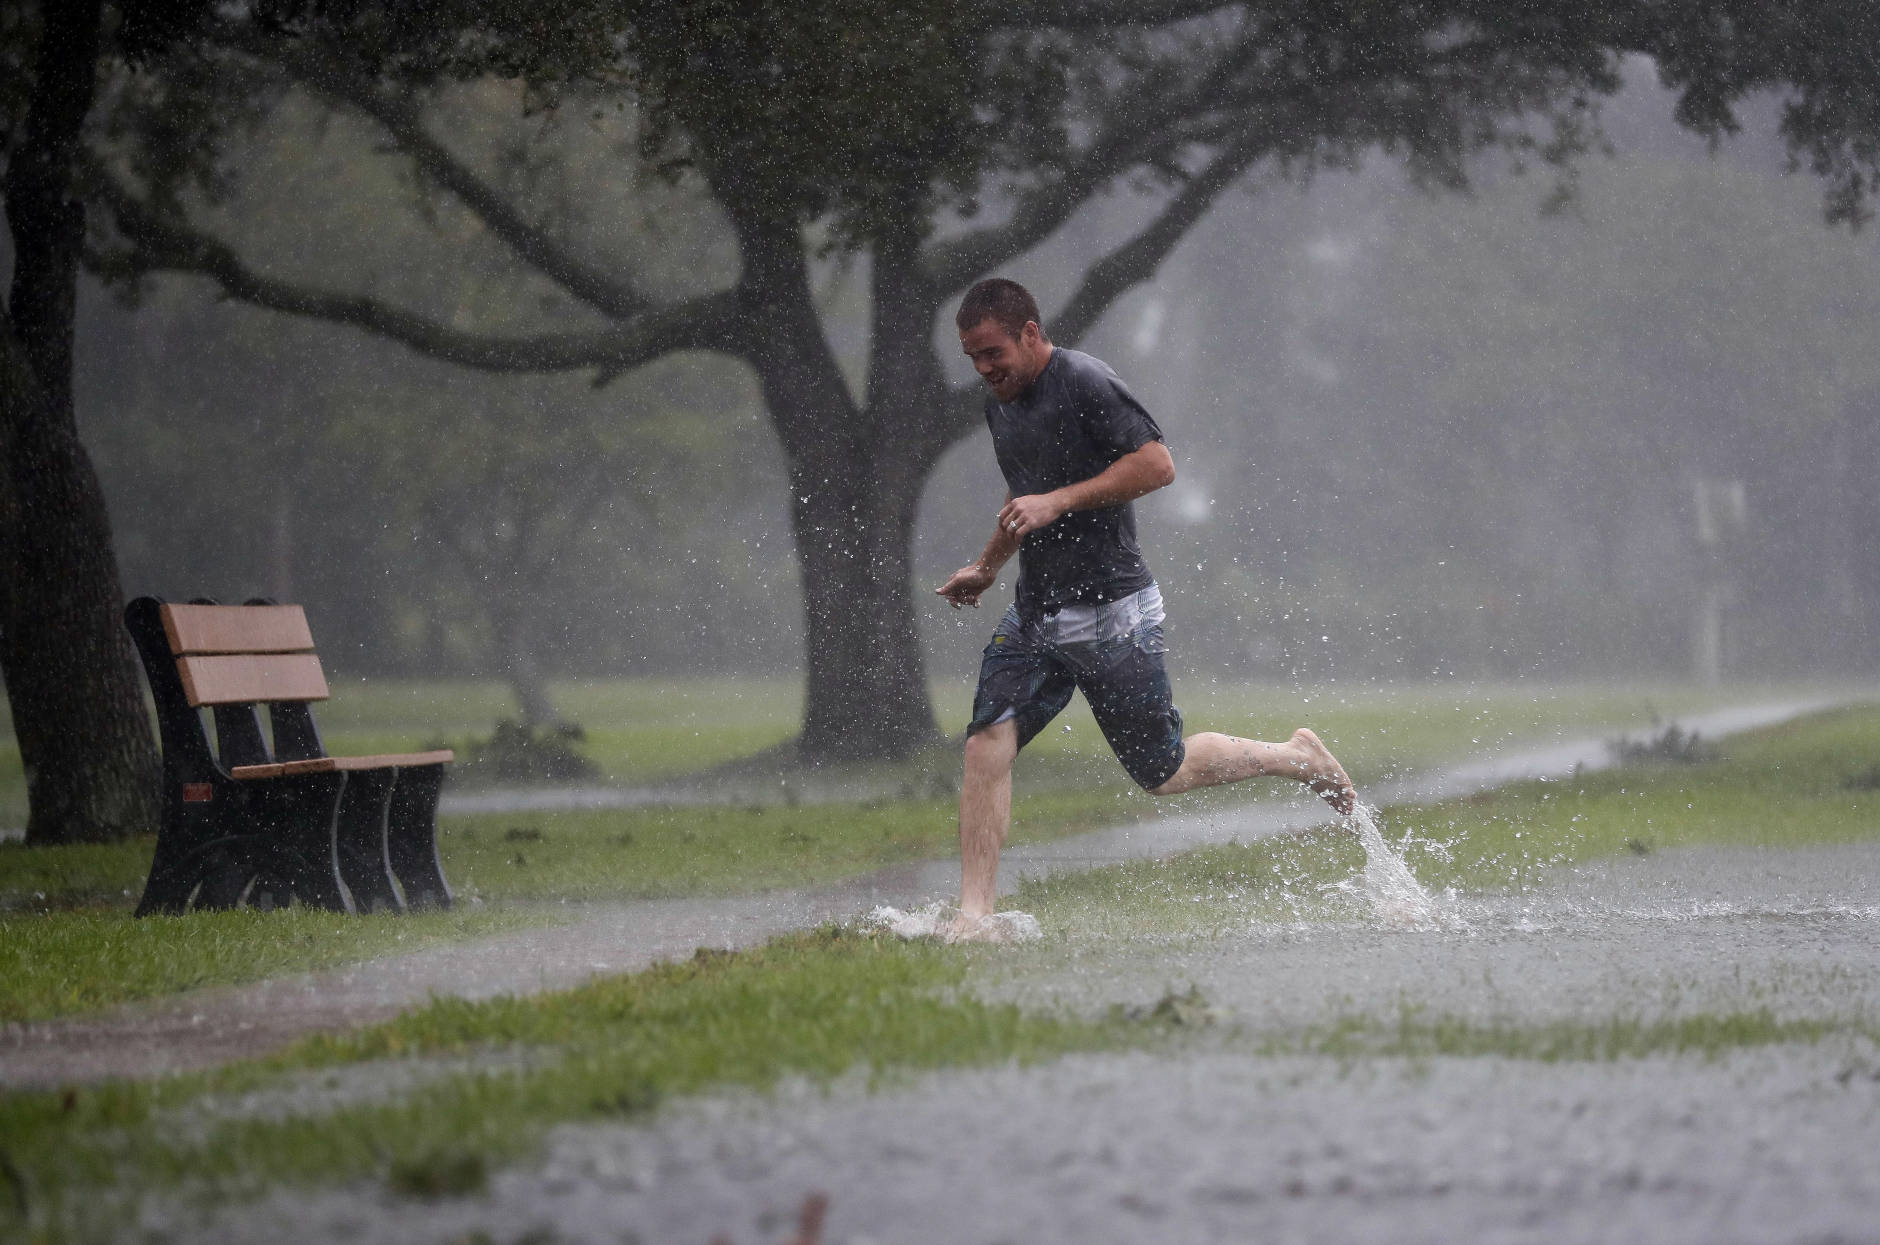 Austin Massett runs through a area beginning to flood as Hurricane Matthew moves closer to St. Augustine, Fla., Friday, Oct. 7, 2016.  Matthew was downgraded to a Category 3 hurricane overnight, and its storm center hung just offshore as it moved up the Florida coastline, sparing communities its full 120 mph winds. (AP Photo/John Bazemore)